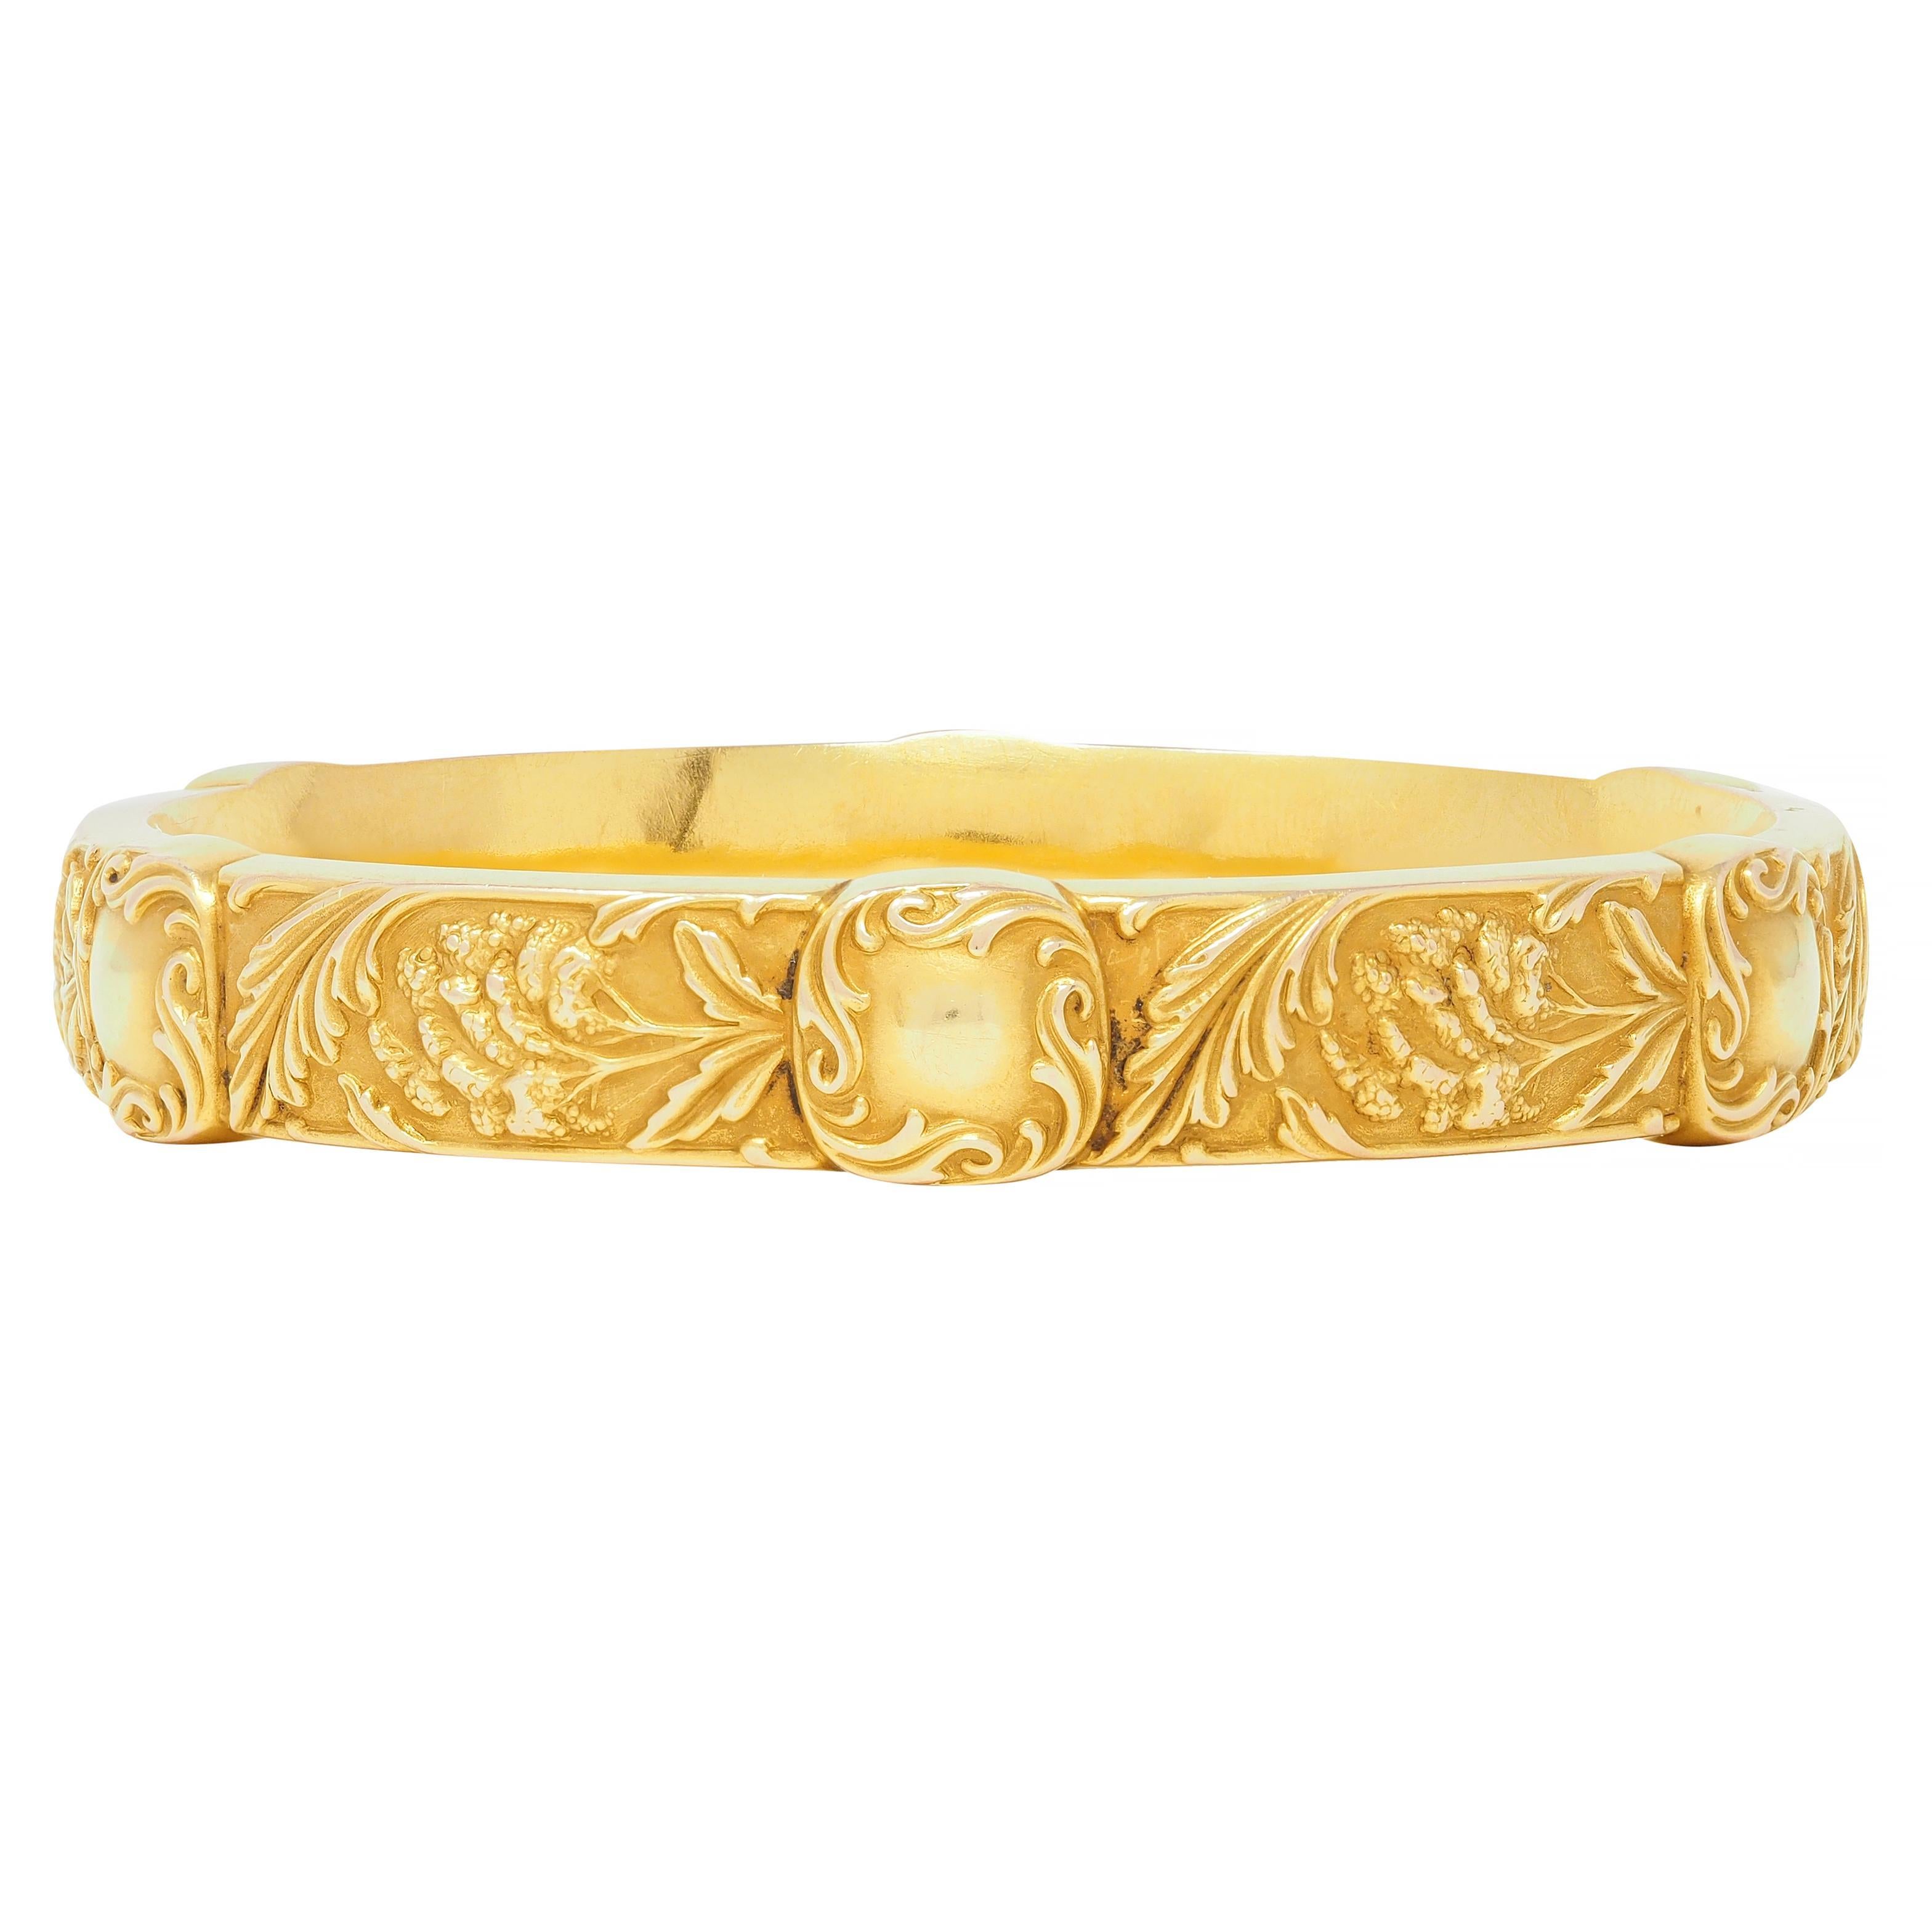 Designed as a curved bangle with raised amaranth flowers rendered throughout
Featuring six cushion-shaped scroll motif stations
Stamped for 14 karat gold
With maker's mark for E.M Gattle
Circa: 1905
Width at widest: 7/16 inches
Bracelet size: 7 1/2